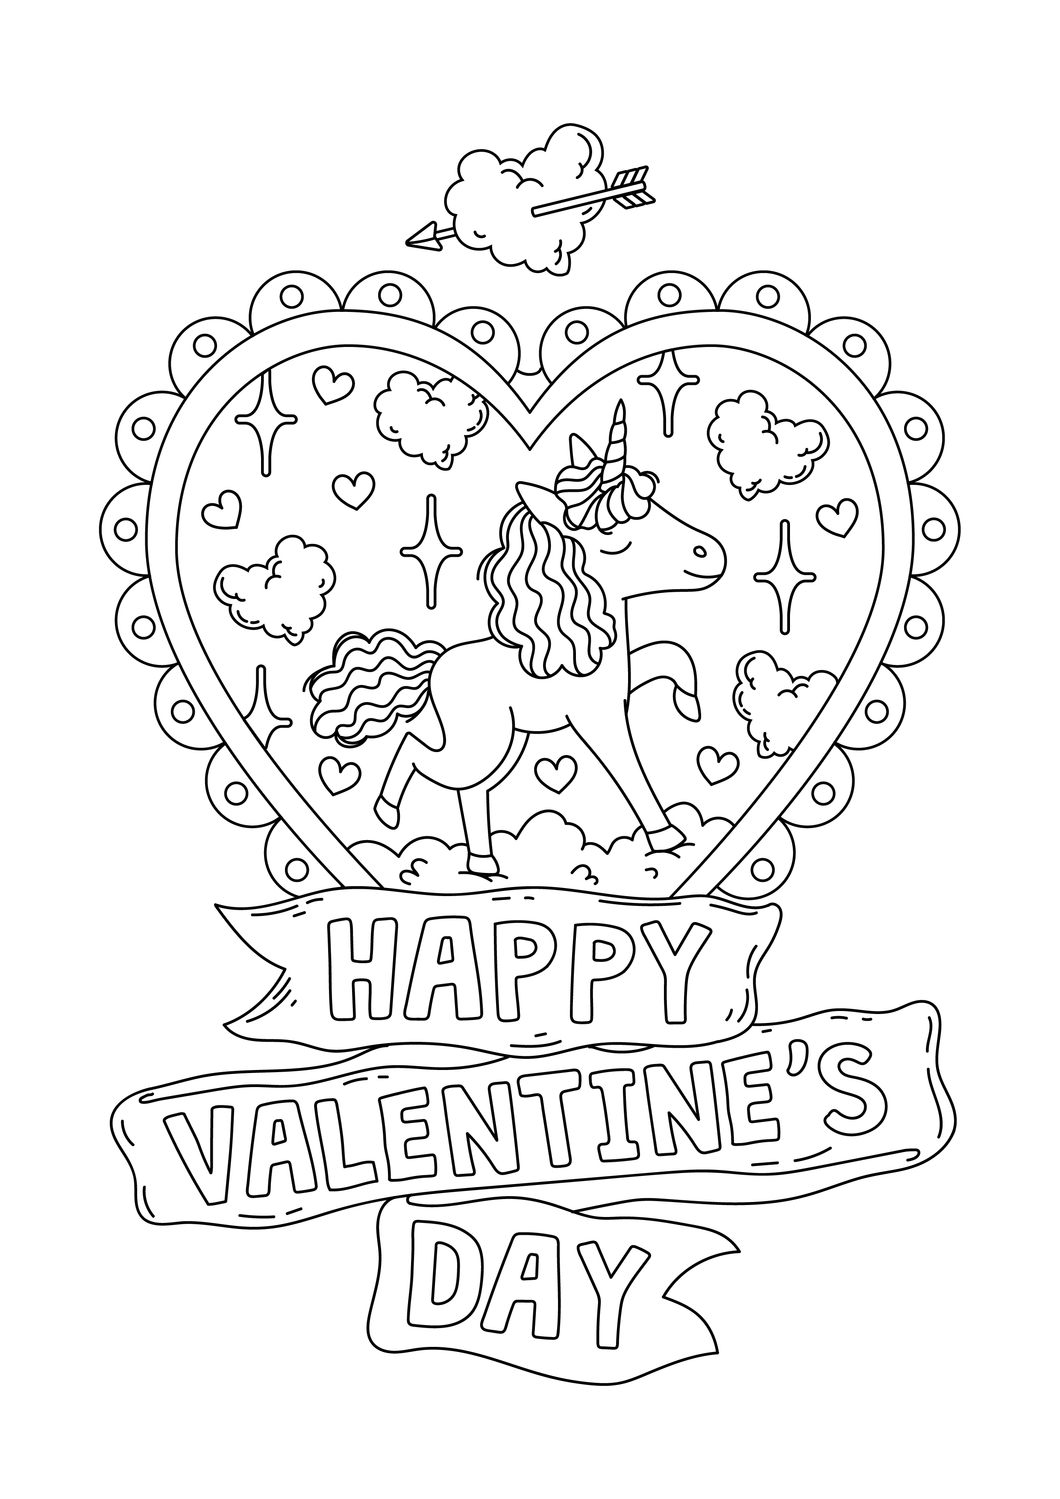 VALENTINE'S DAY Coloring Pages